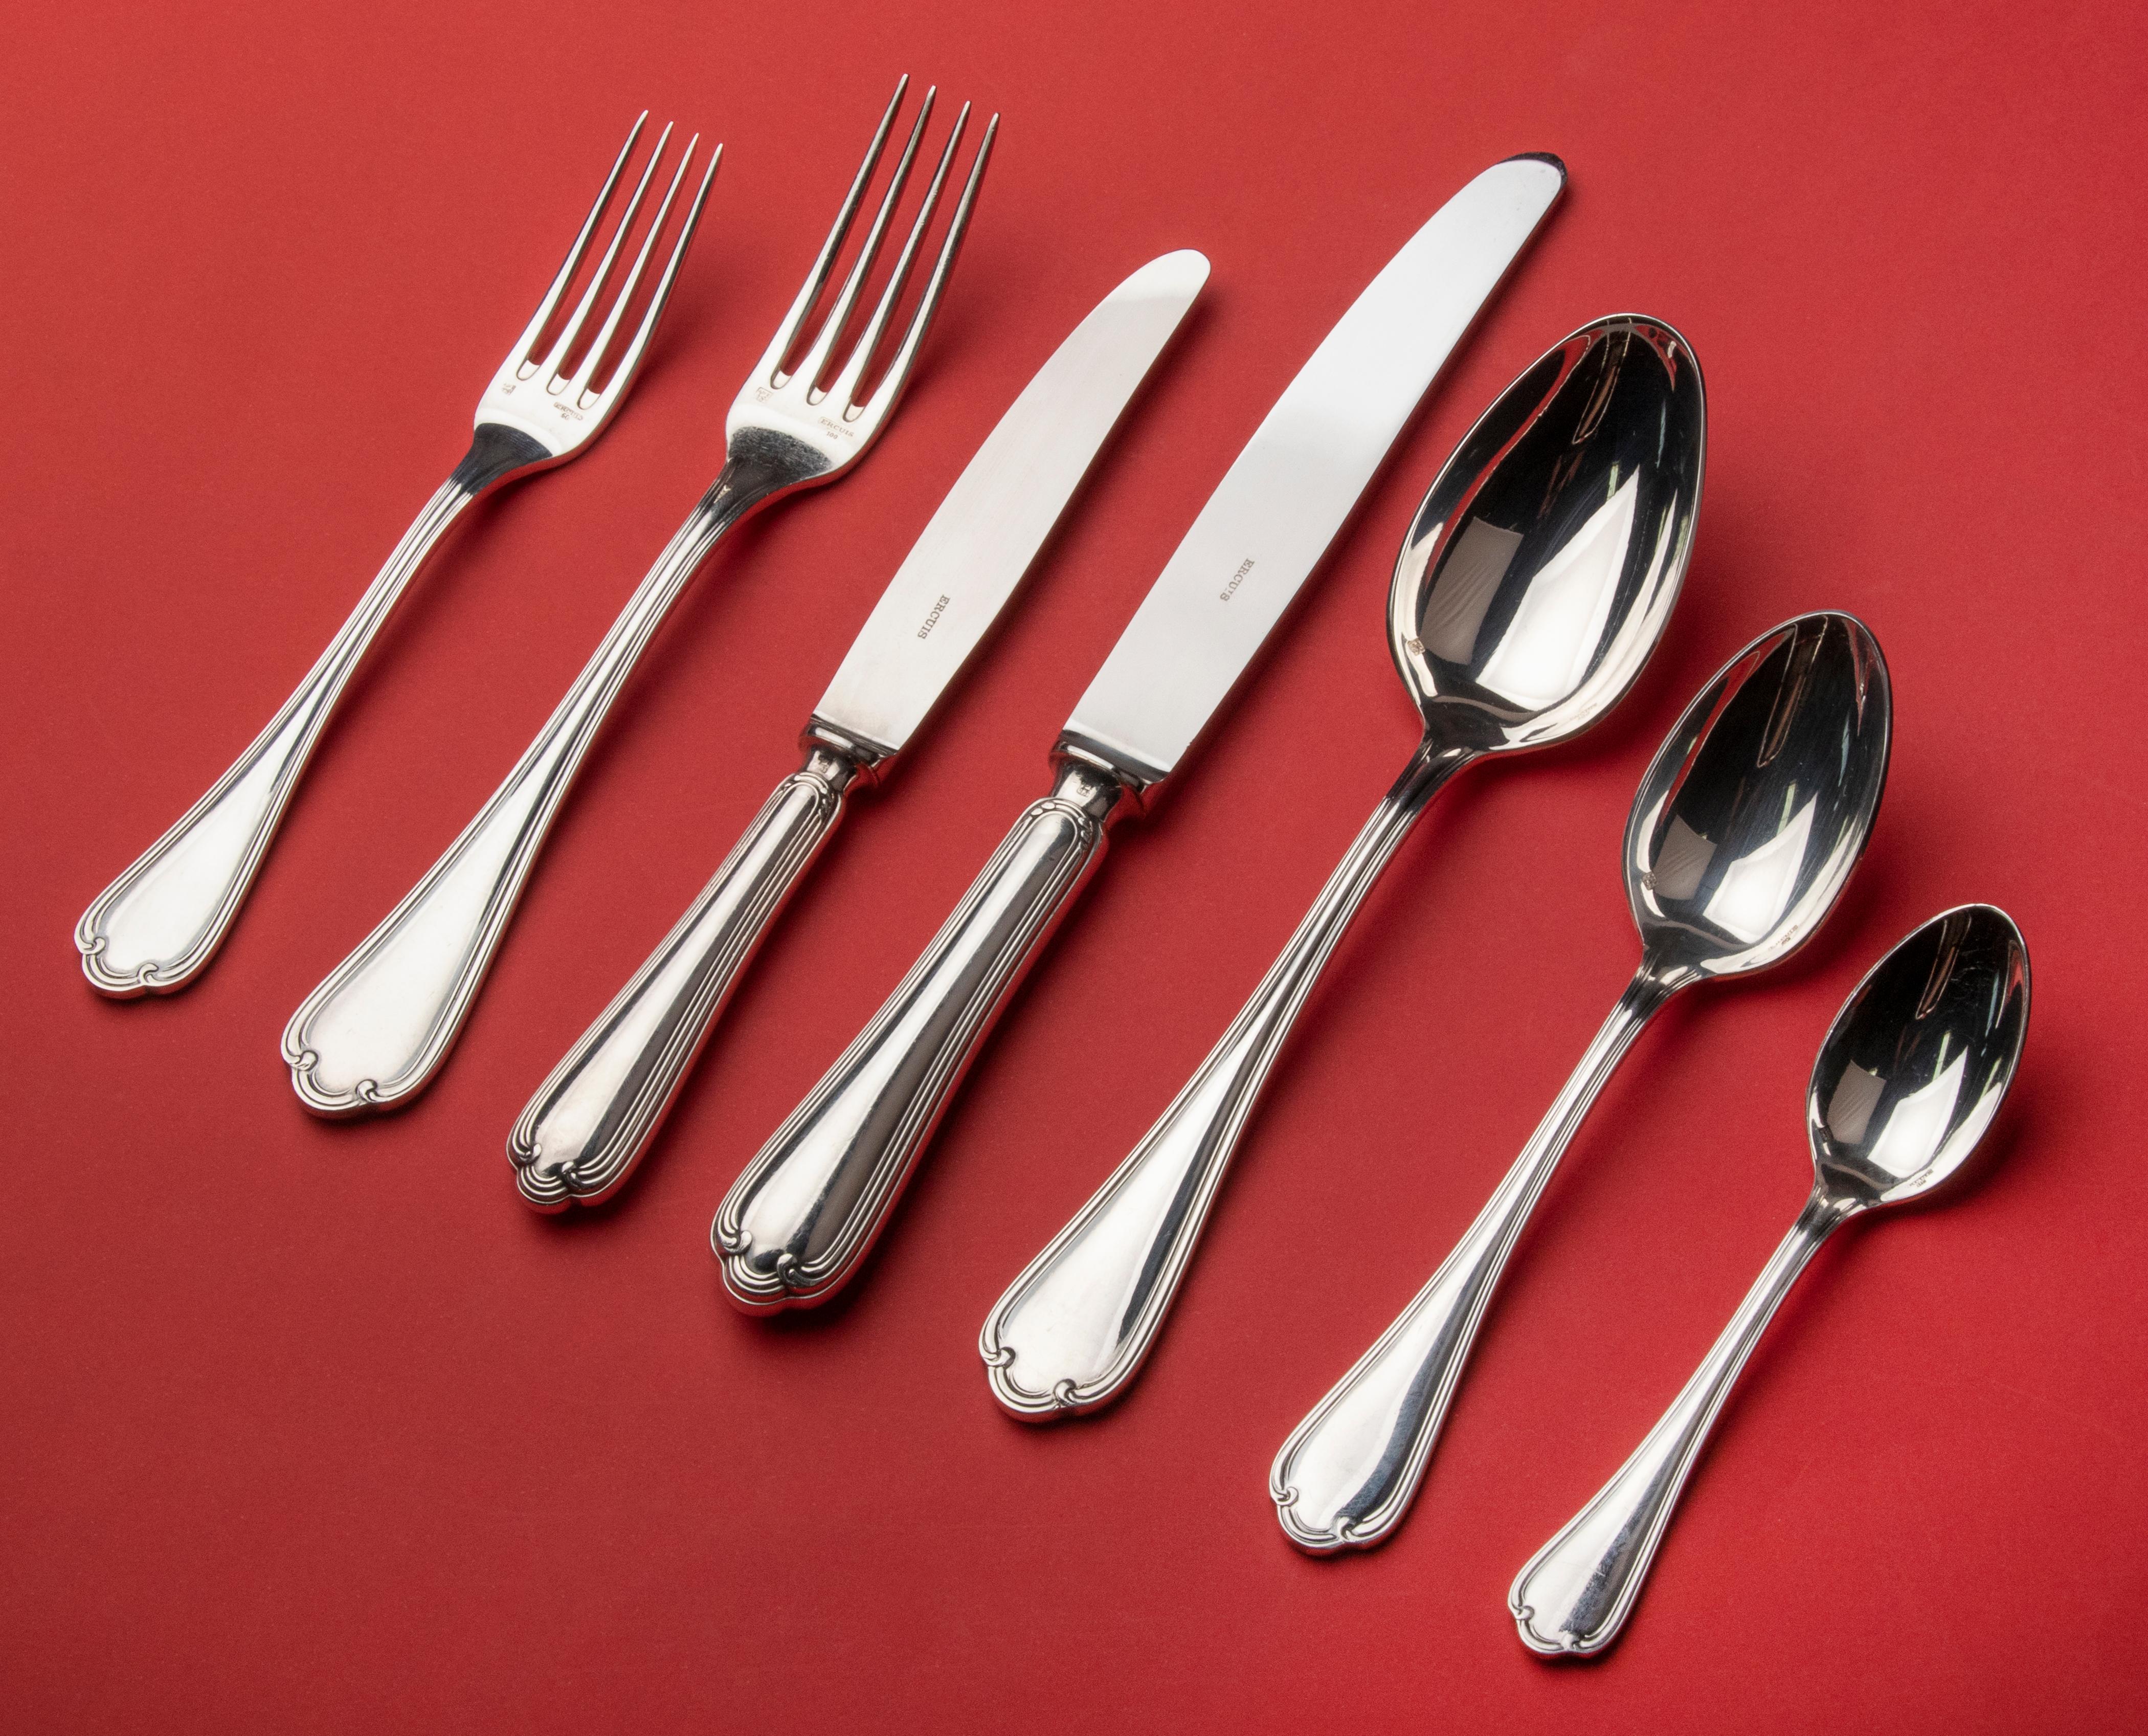 Beautiful set of silver-plated table cutlery for 12 people from the French brand Ercuis. The cutlery has an elegant design, with round handles containing a graceful small work. This classic and timeless design is also known as 'Sully', it is still